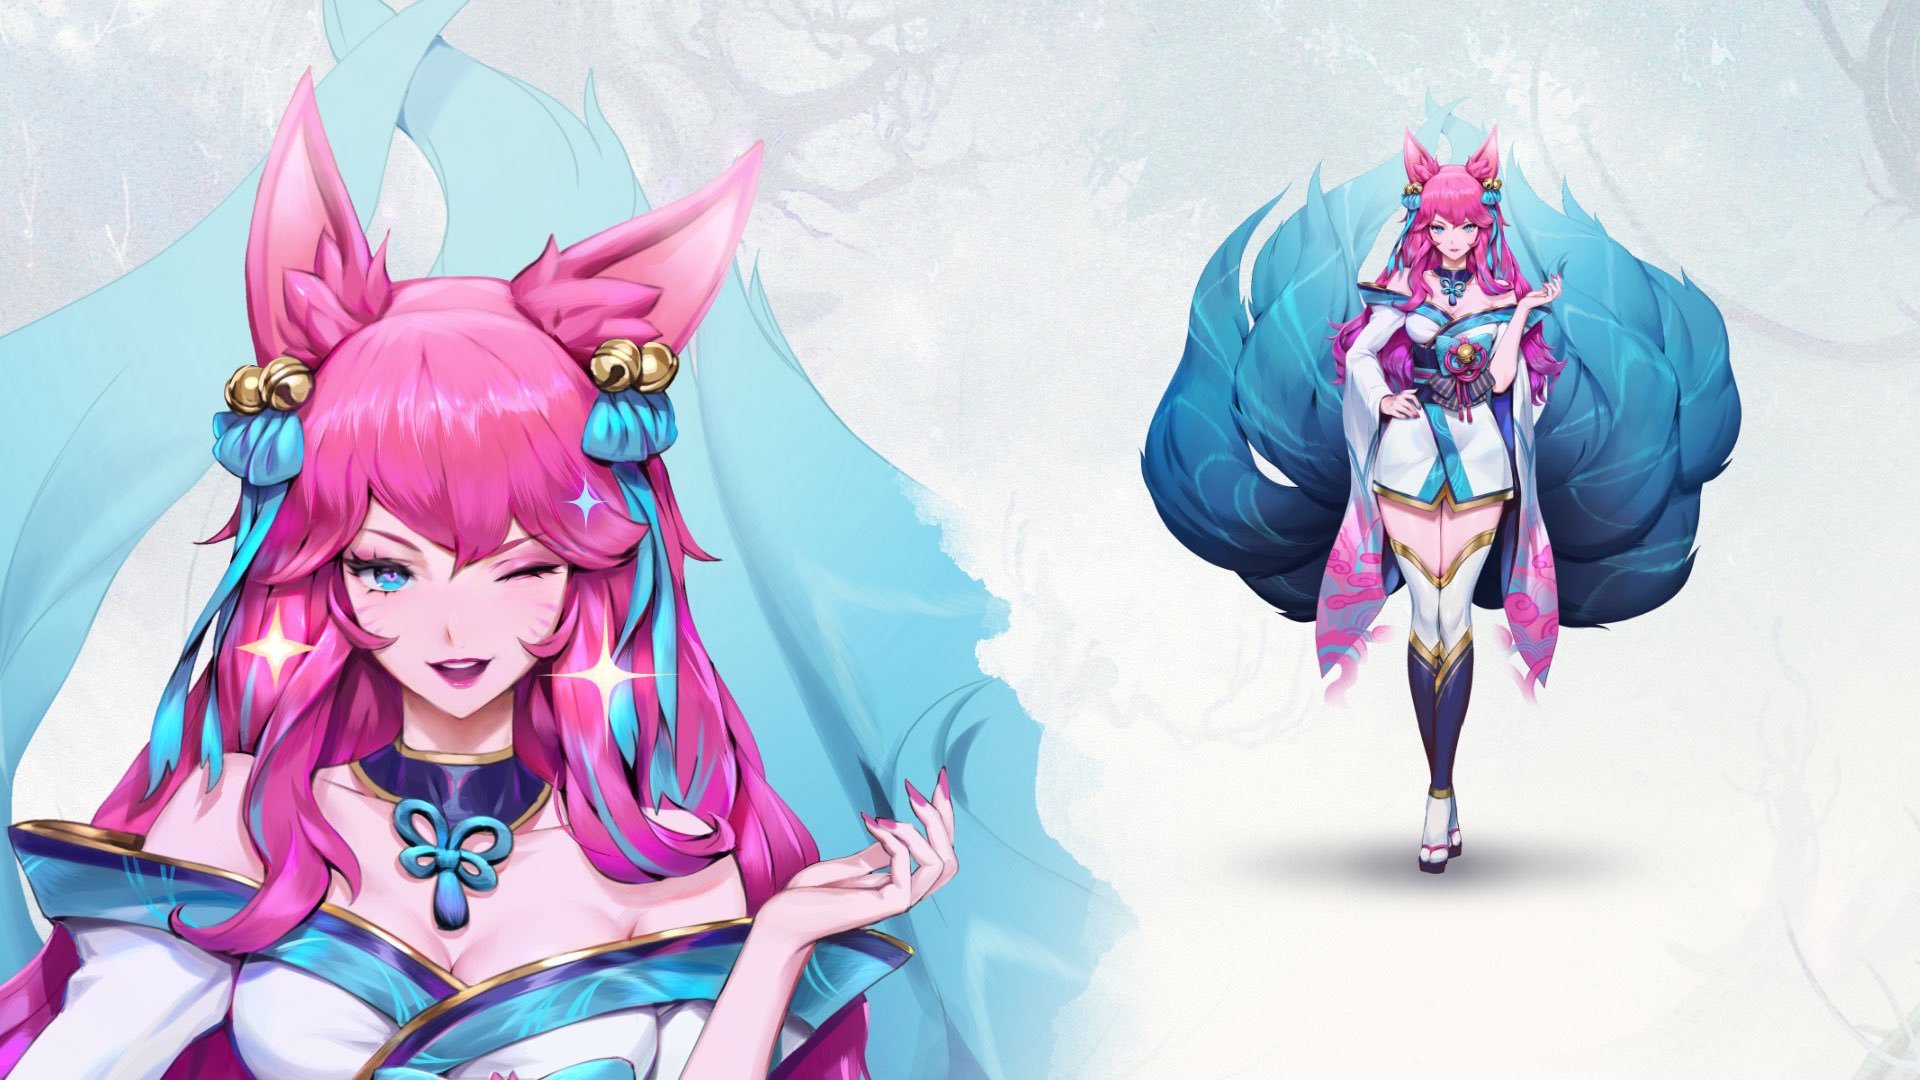 Anime 1920x1080 Spirit Blossom (League of Legends) League of Legends video game art PC gaming fantasy girl animal ears video game girls